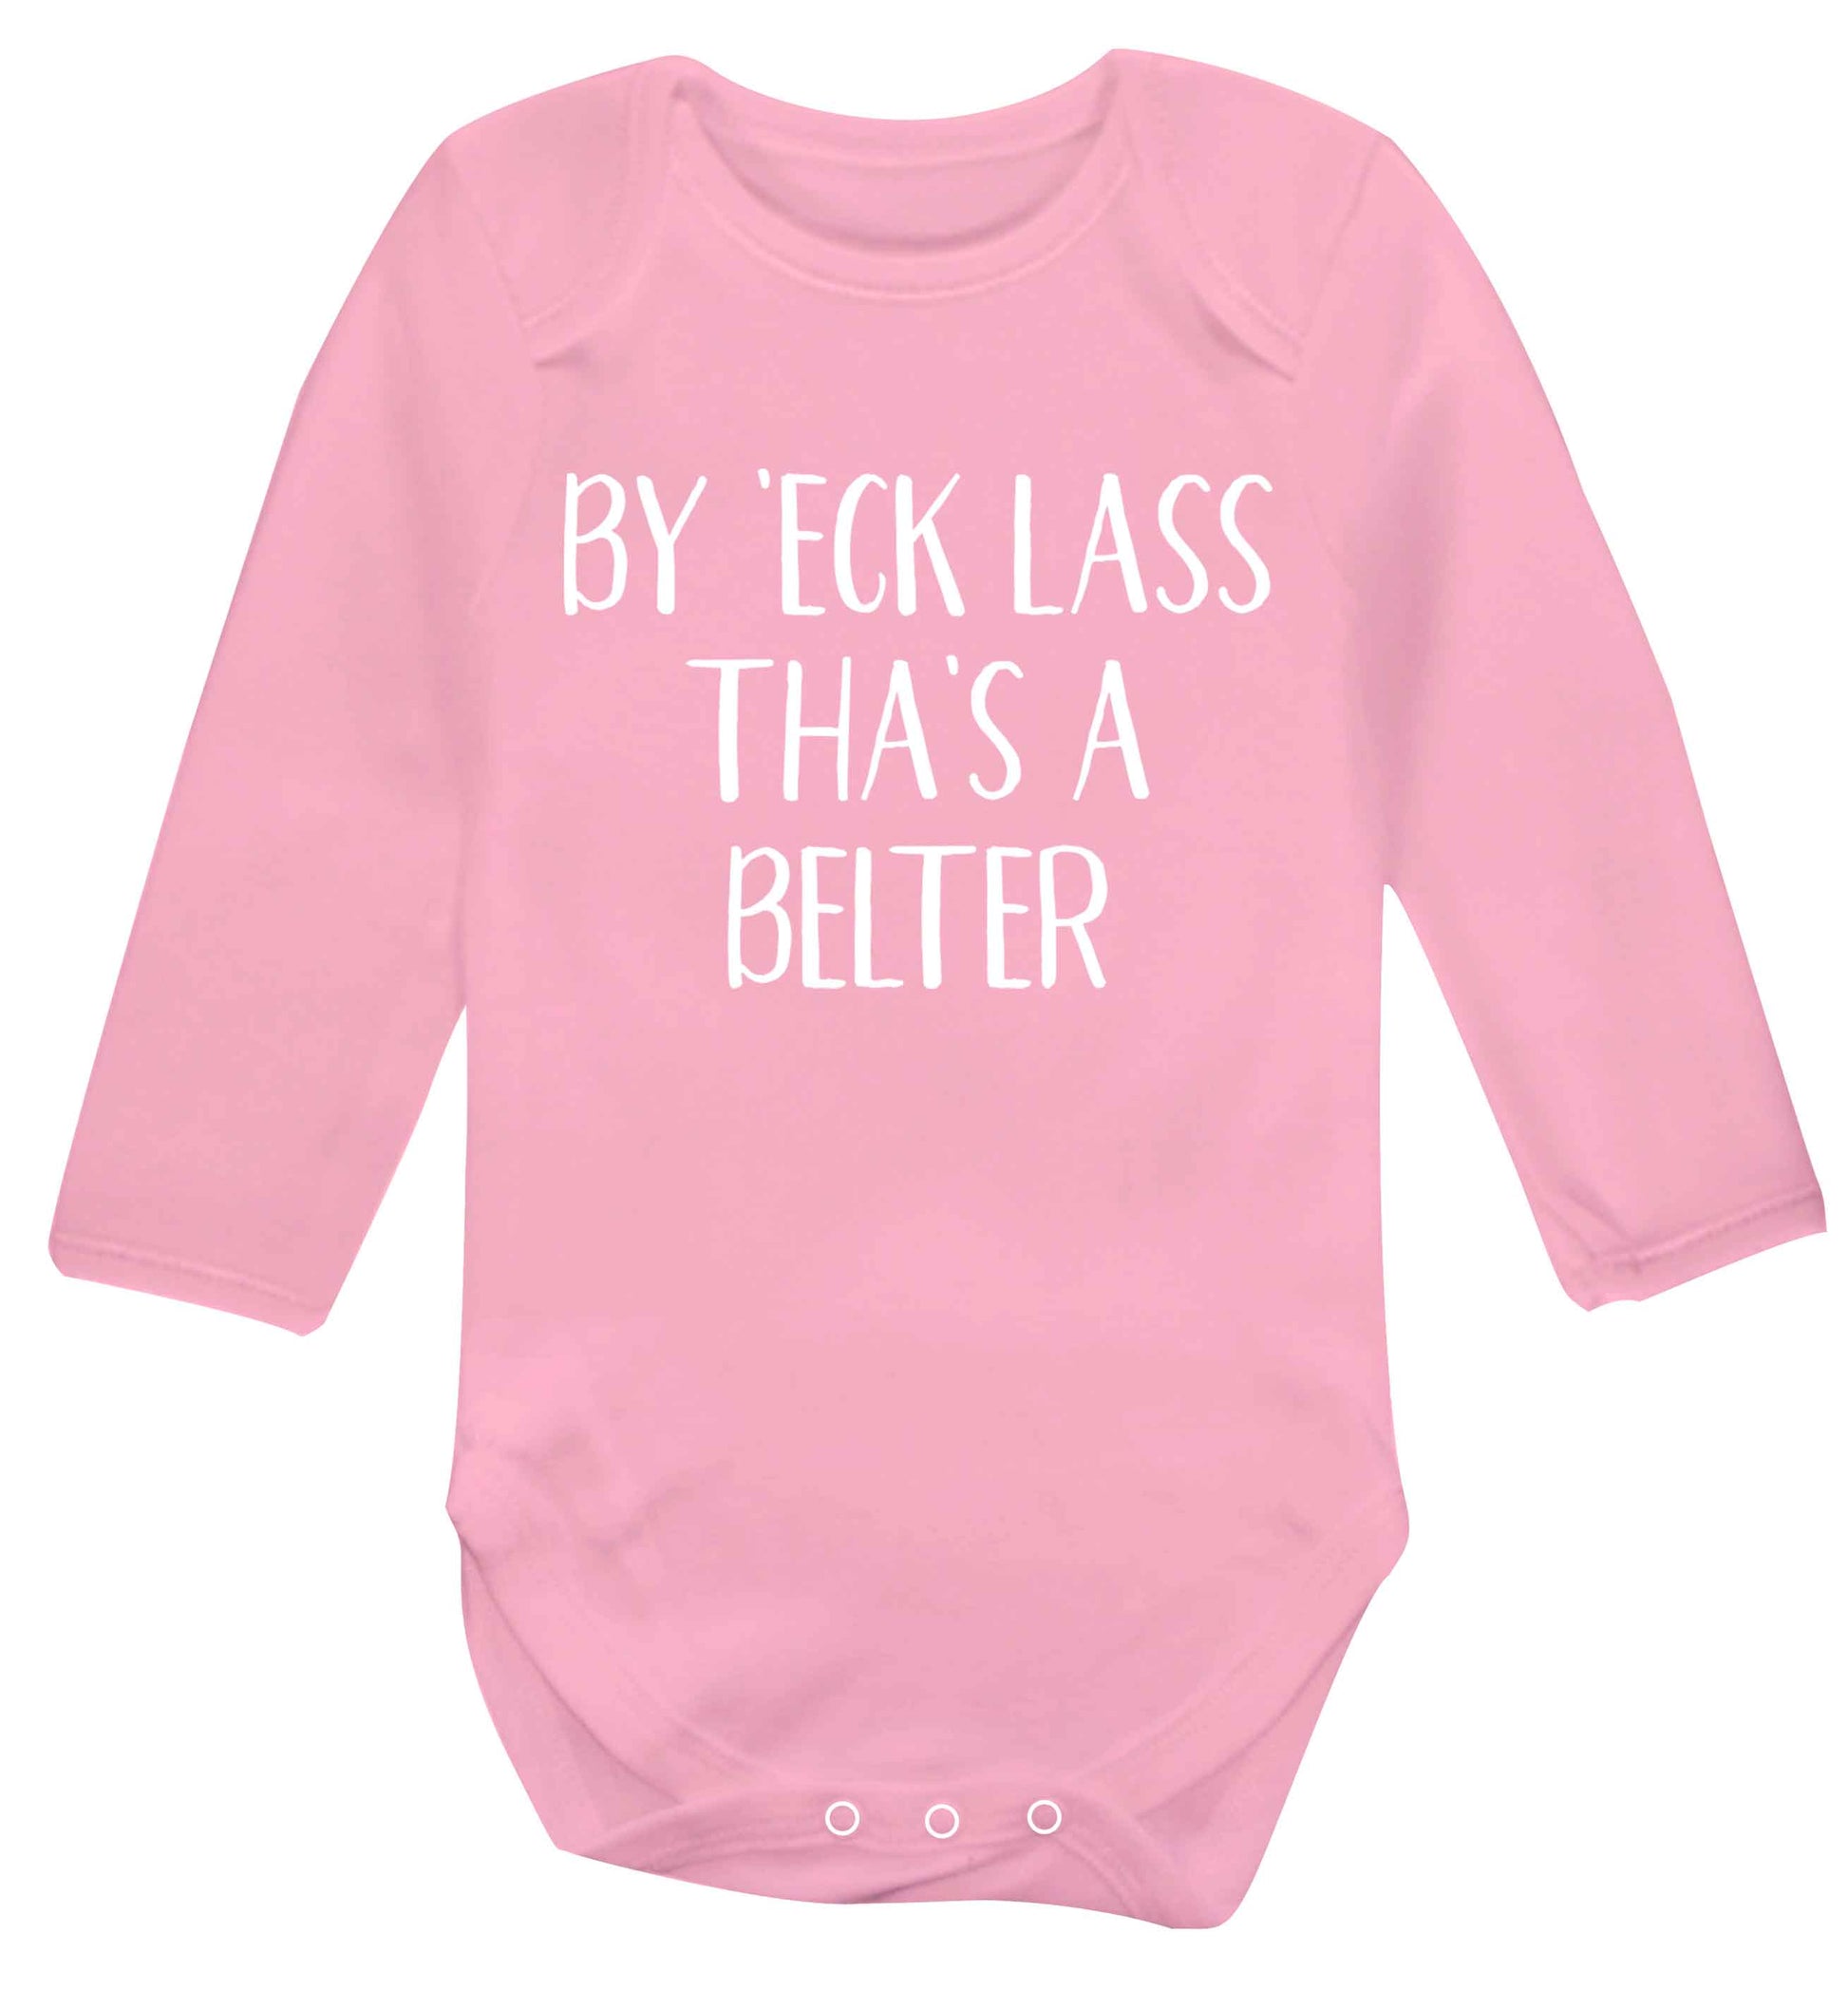 Be 'eck lass tha's a belter Baby Vest long sleeved pale pink 6-12 months